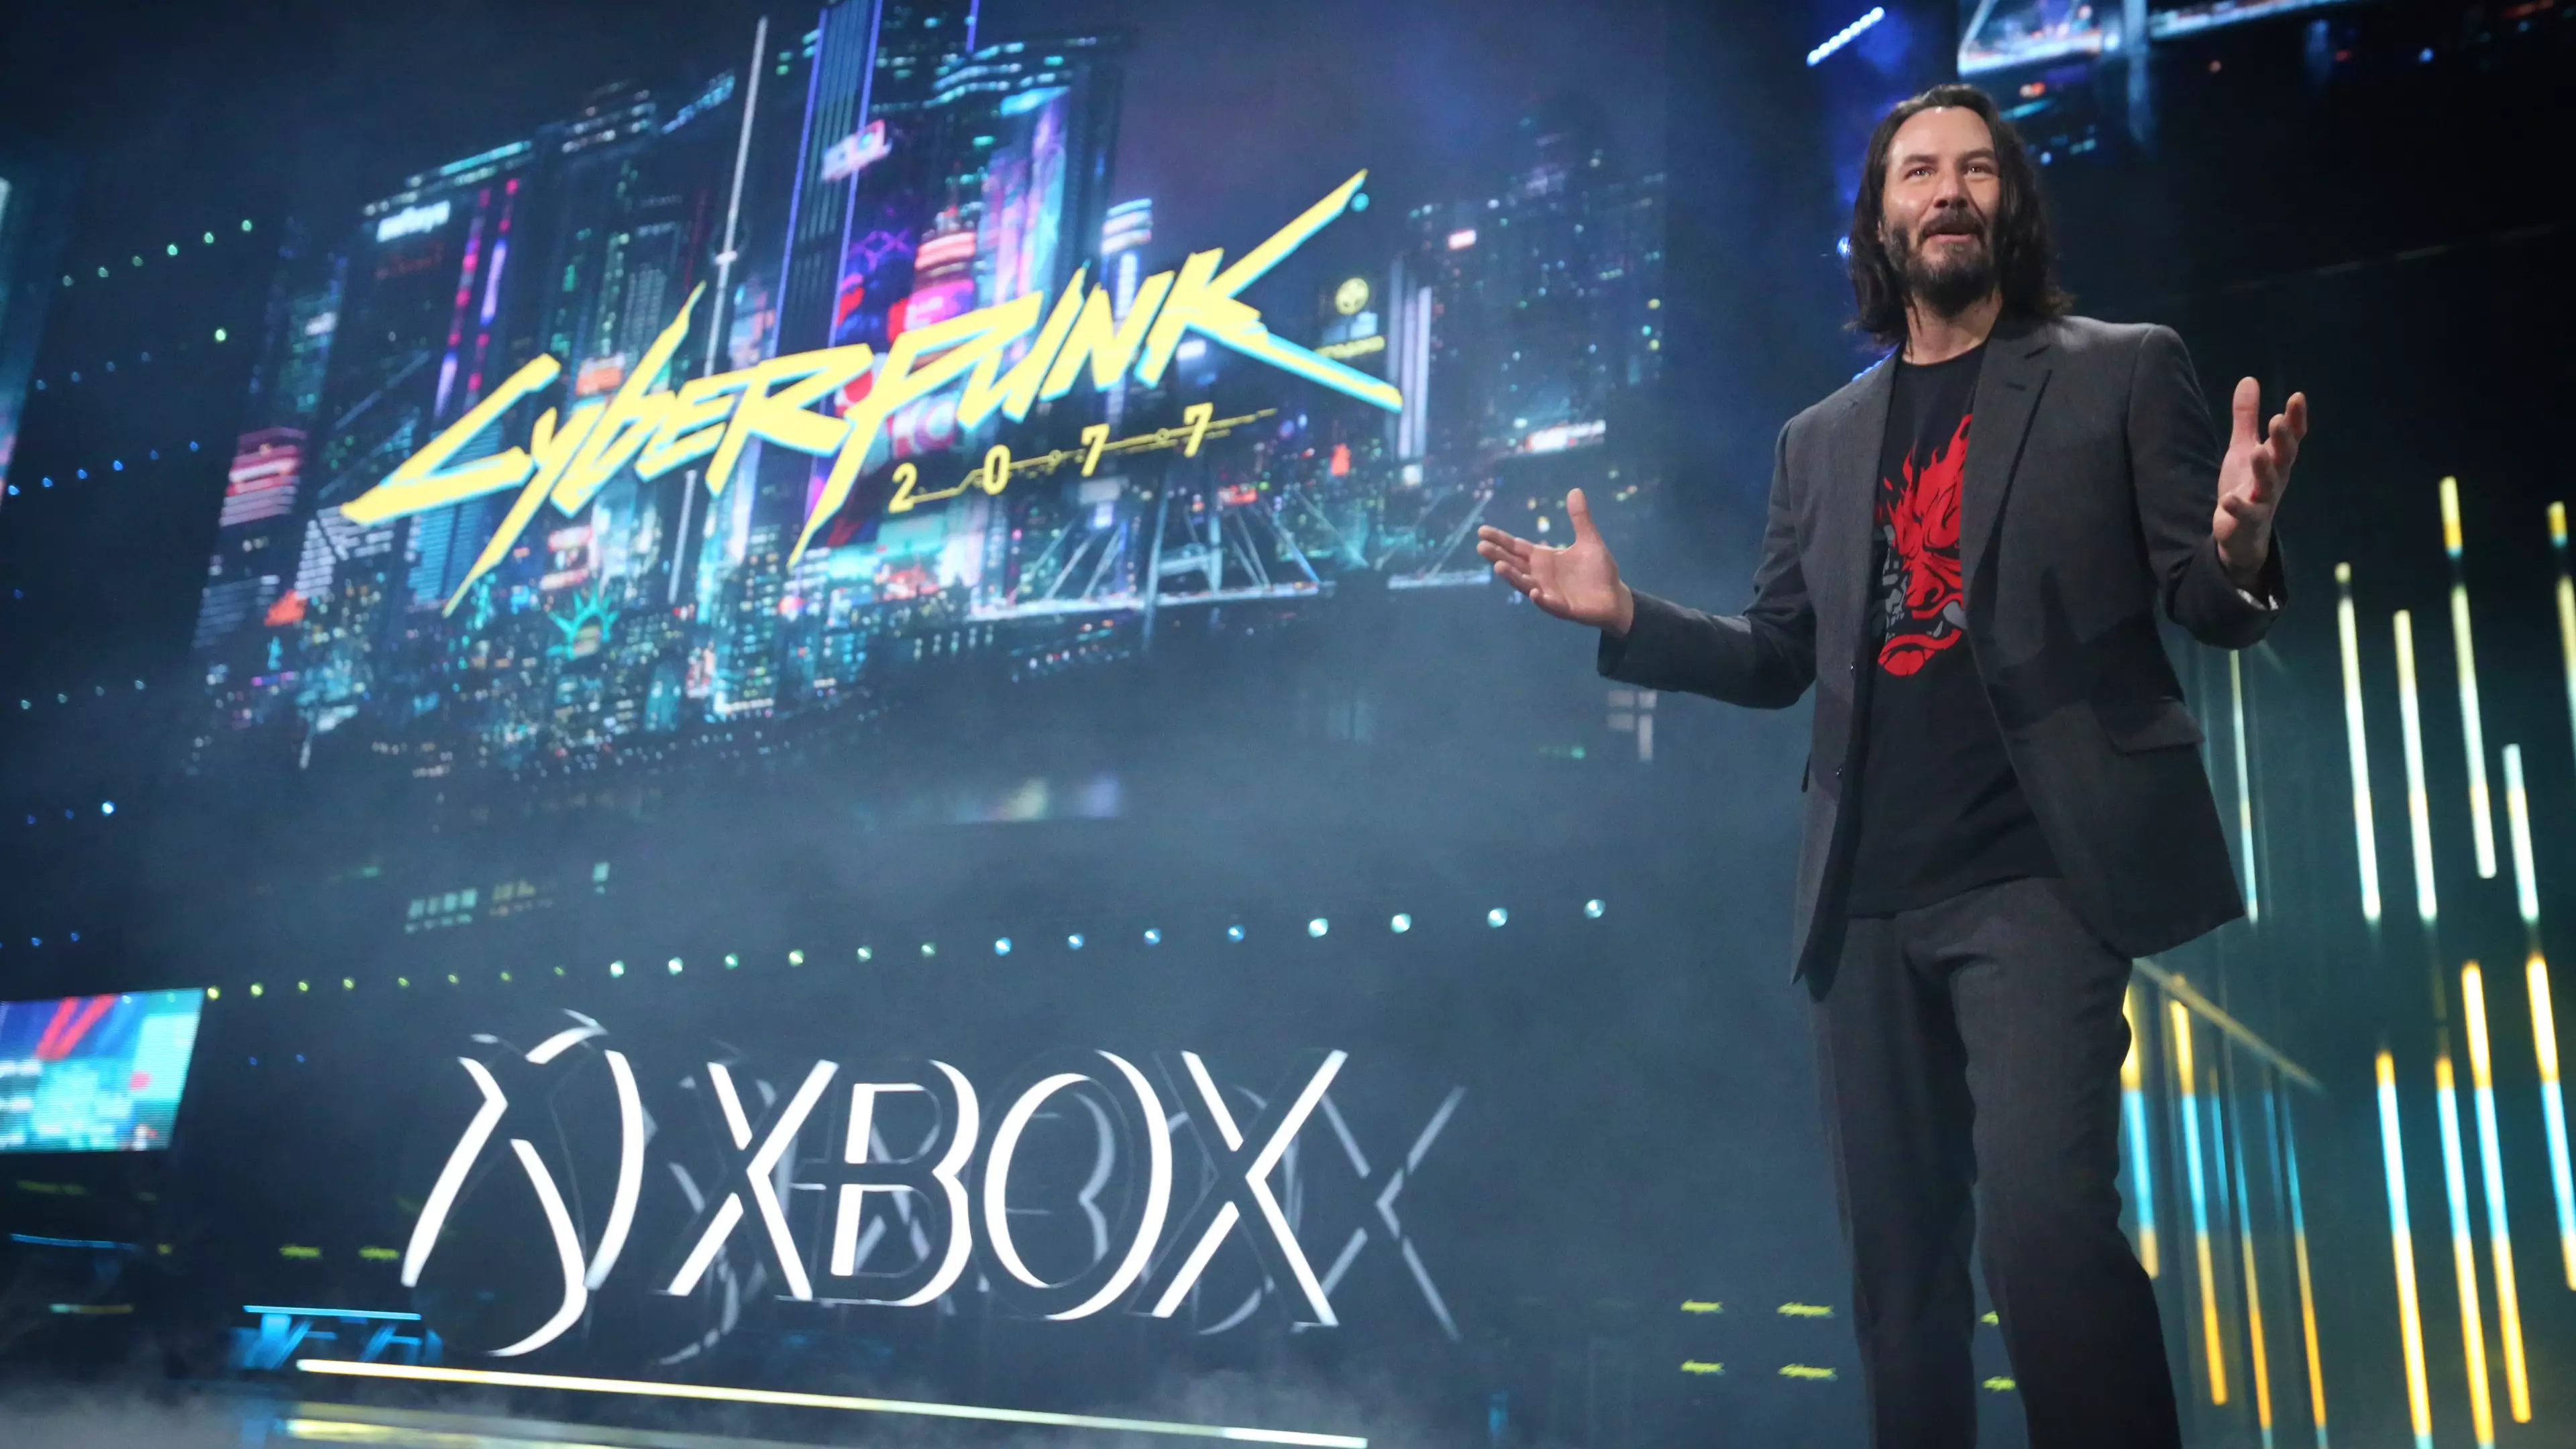 Keanu Reeves presenting the Cyberpunk 2077 reveal trailer for CD Projekt Red /